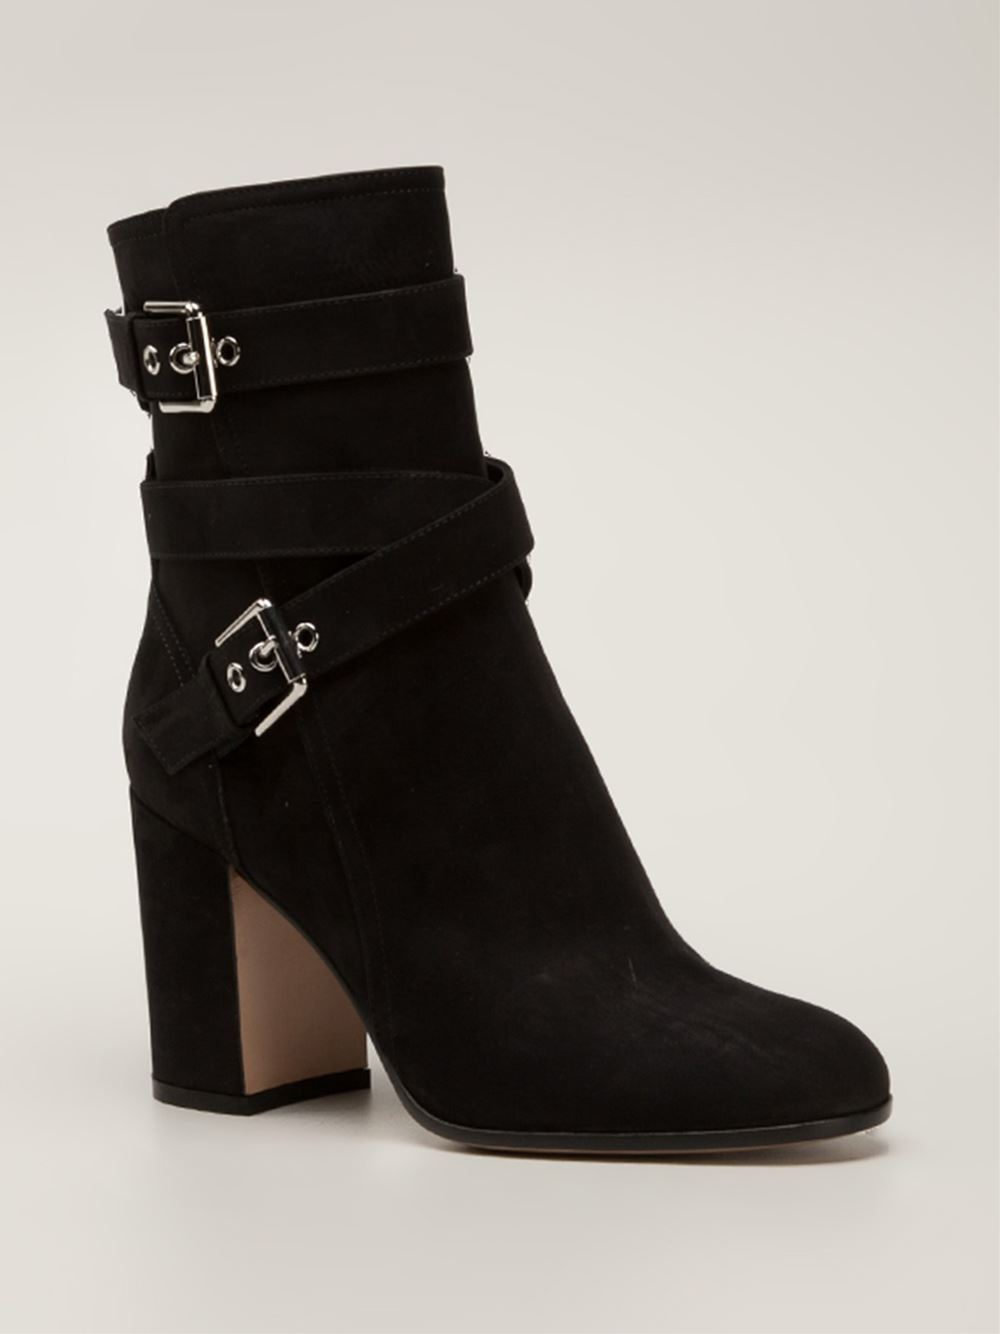 Lyst - Gianvito Rossi Ankle Boots in Black